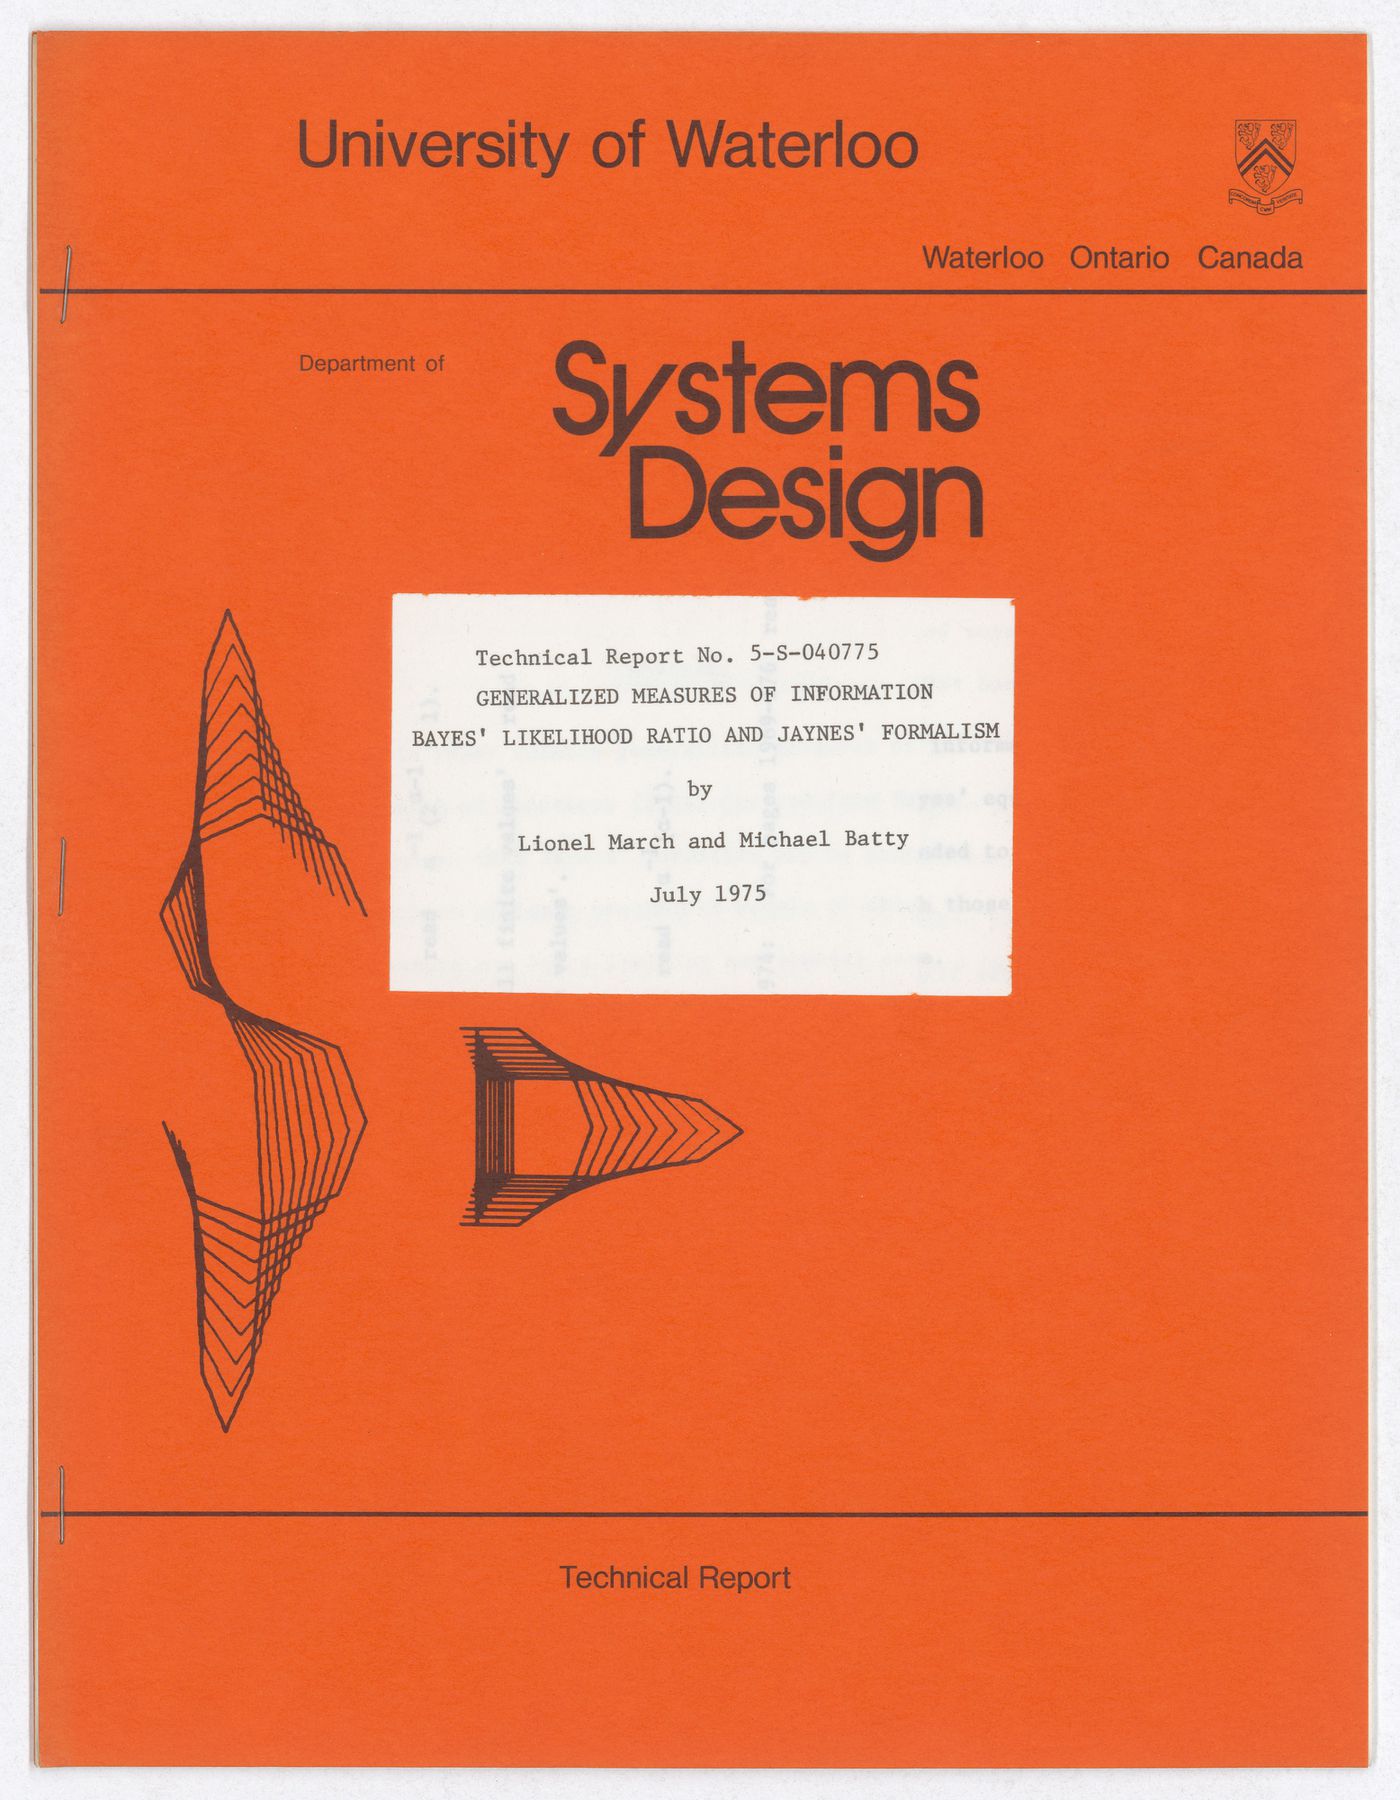 Department of systems design technical report by Lionel March and Michael Batty, University of Waterloo, Ontario, Canada